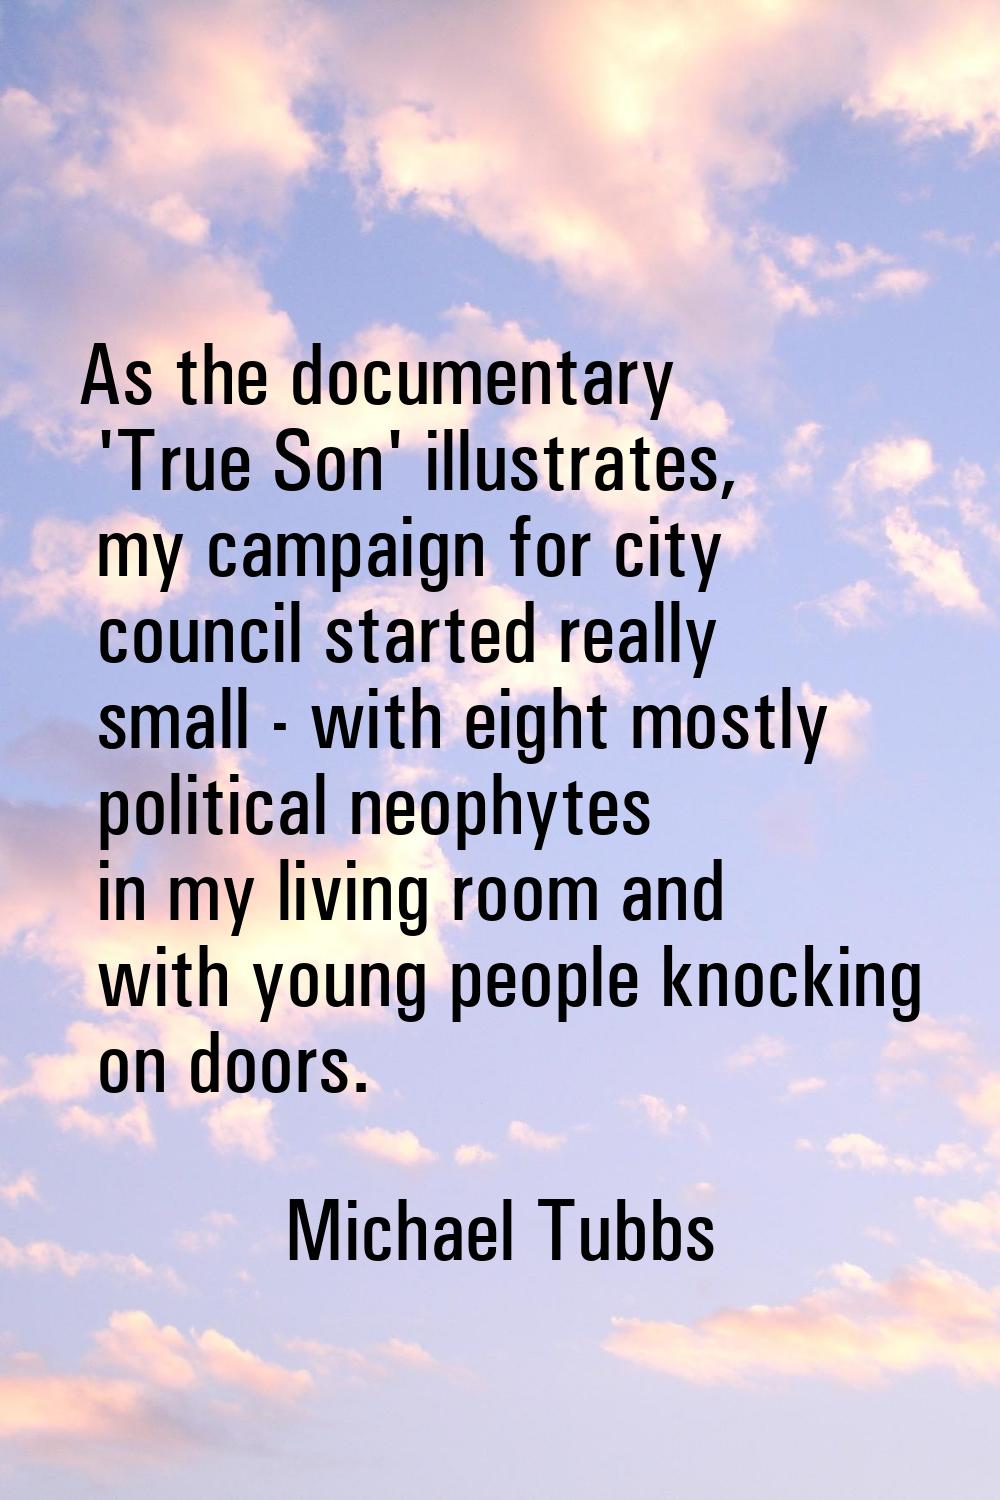 As the documentary 'True Son' illustrates, my campaign for city council started really small - with